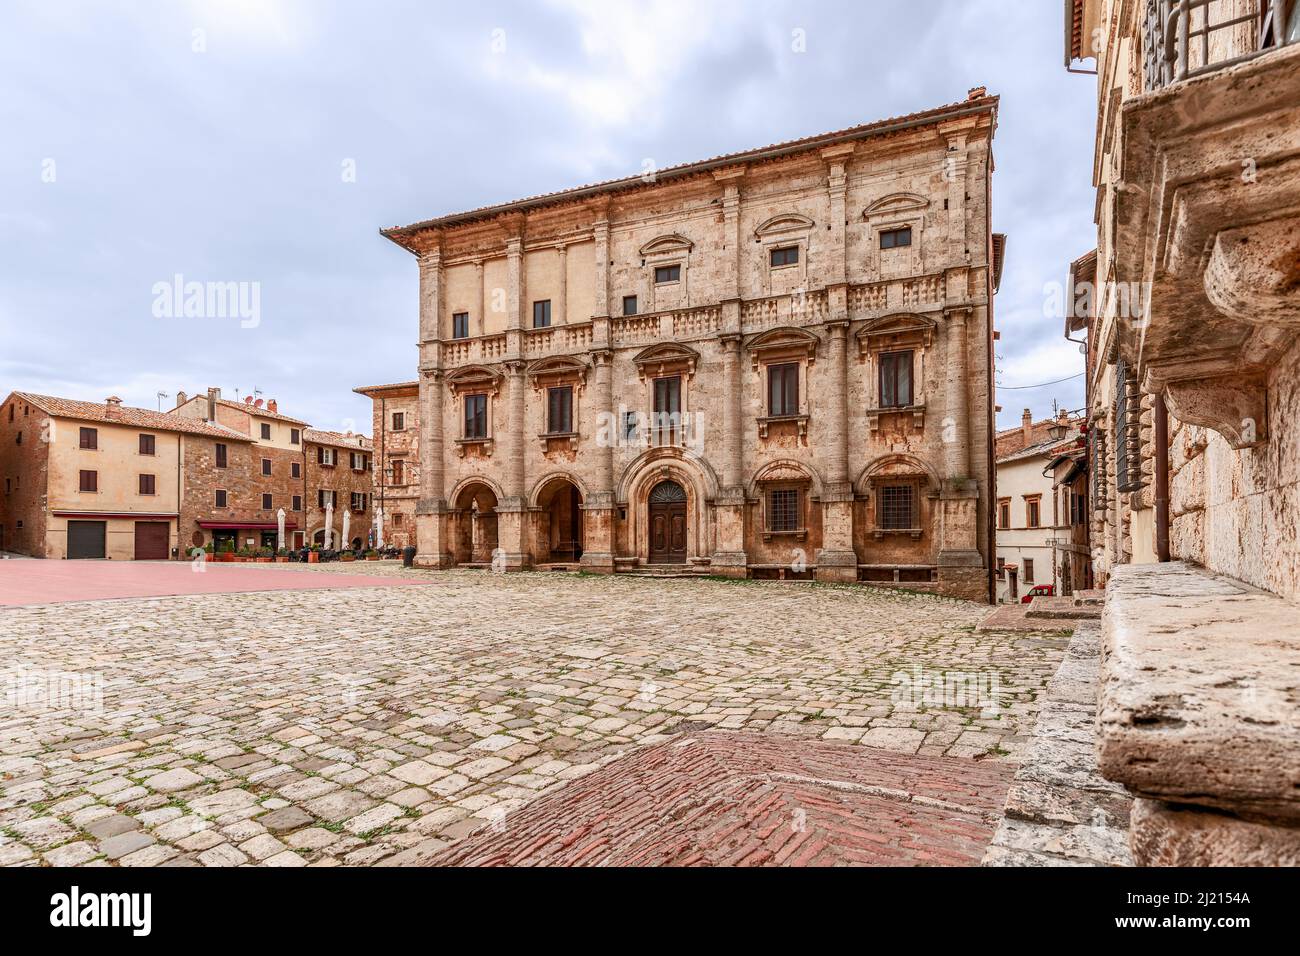 A complex of Renaissance historical buildings on the cobbled central square Piazza Grande in medieval Montepulciano town, Tuscany, Italy Stock Photo